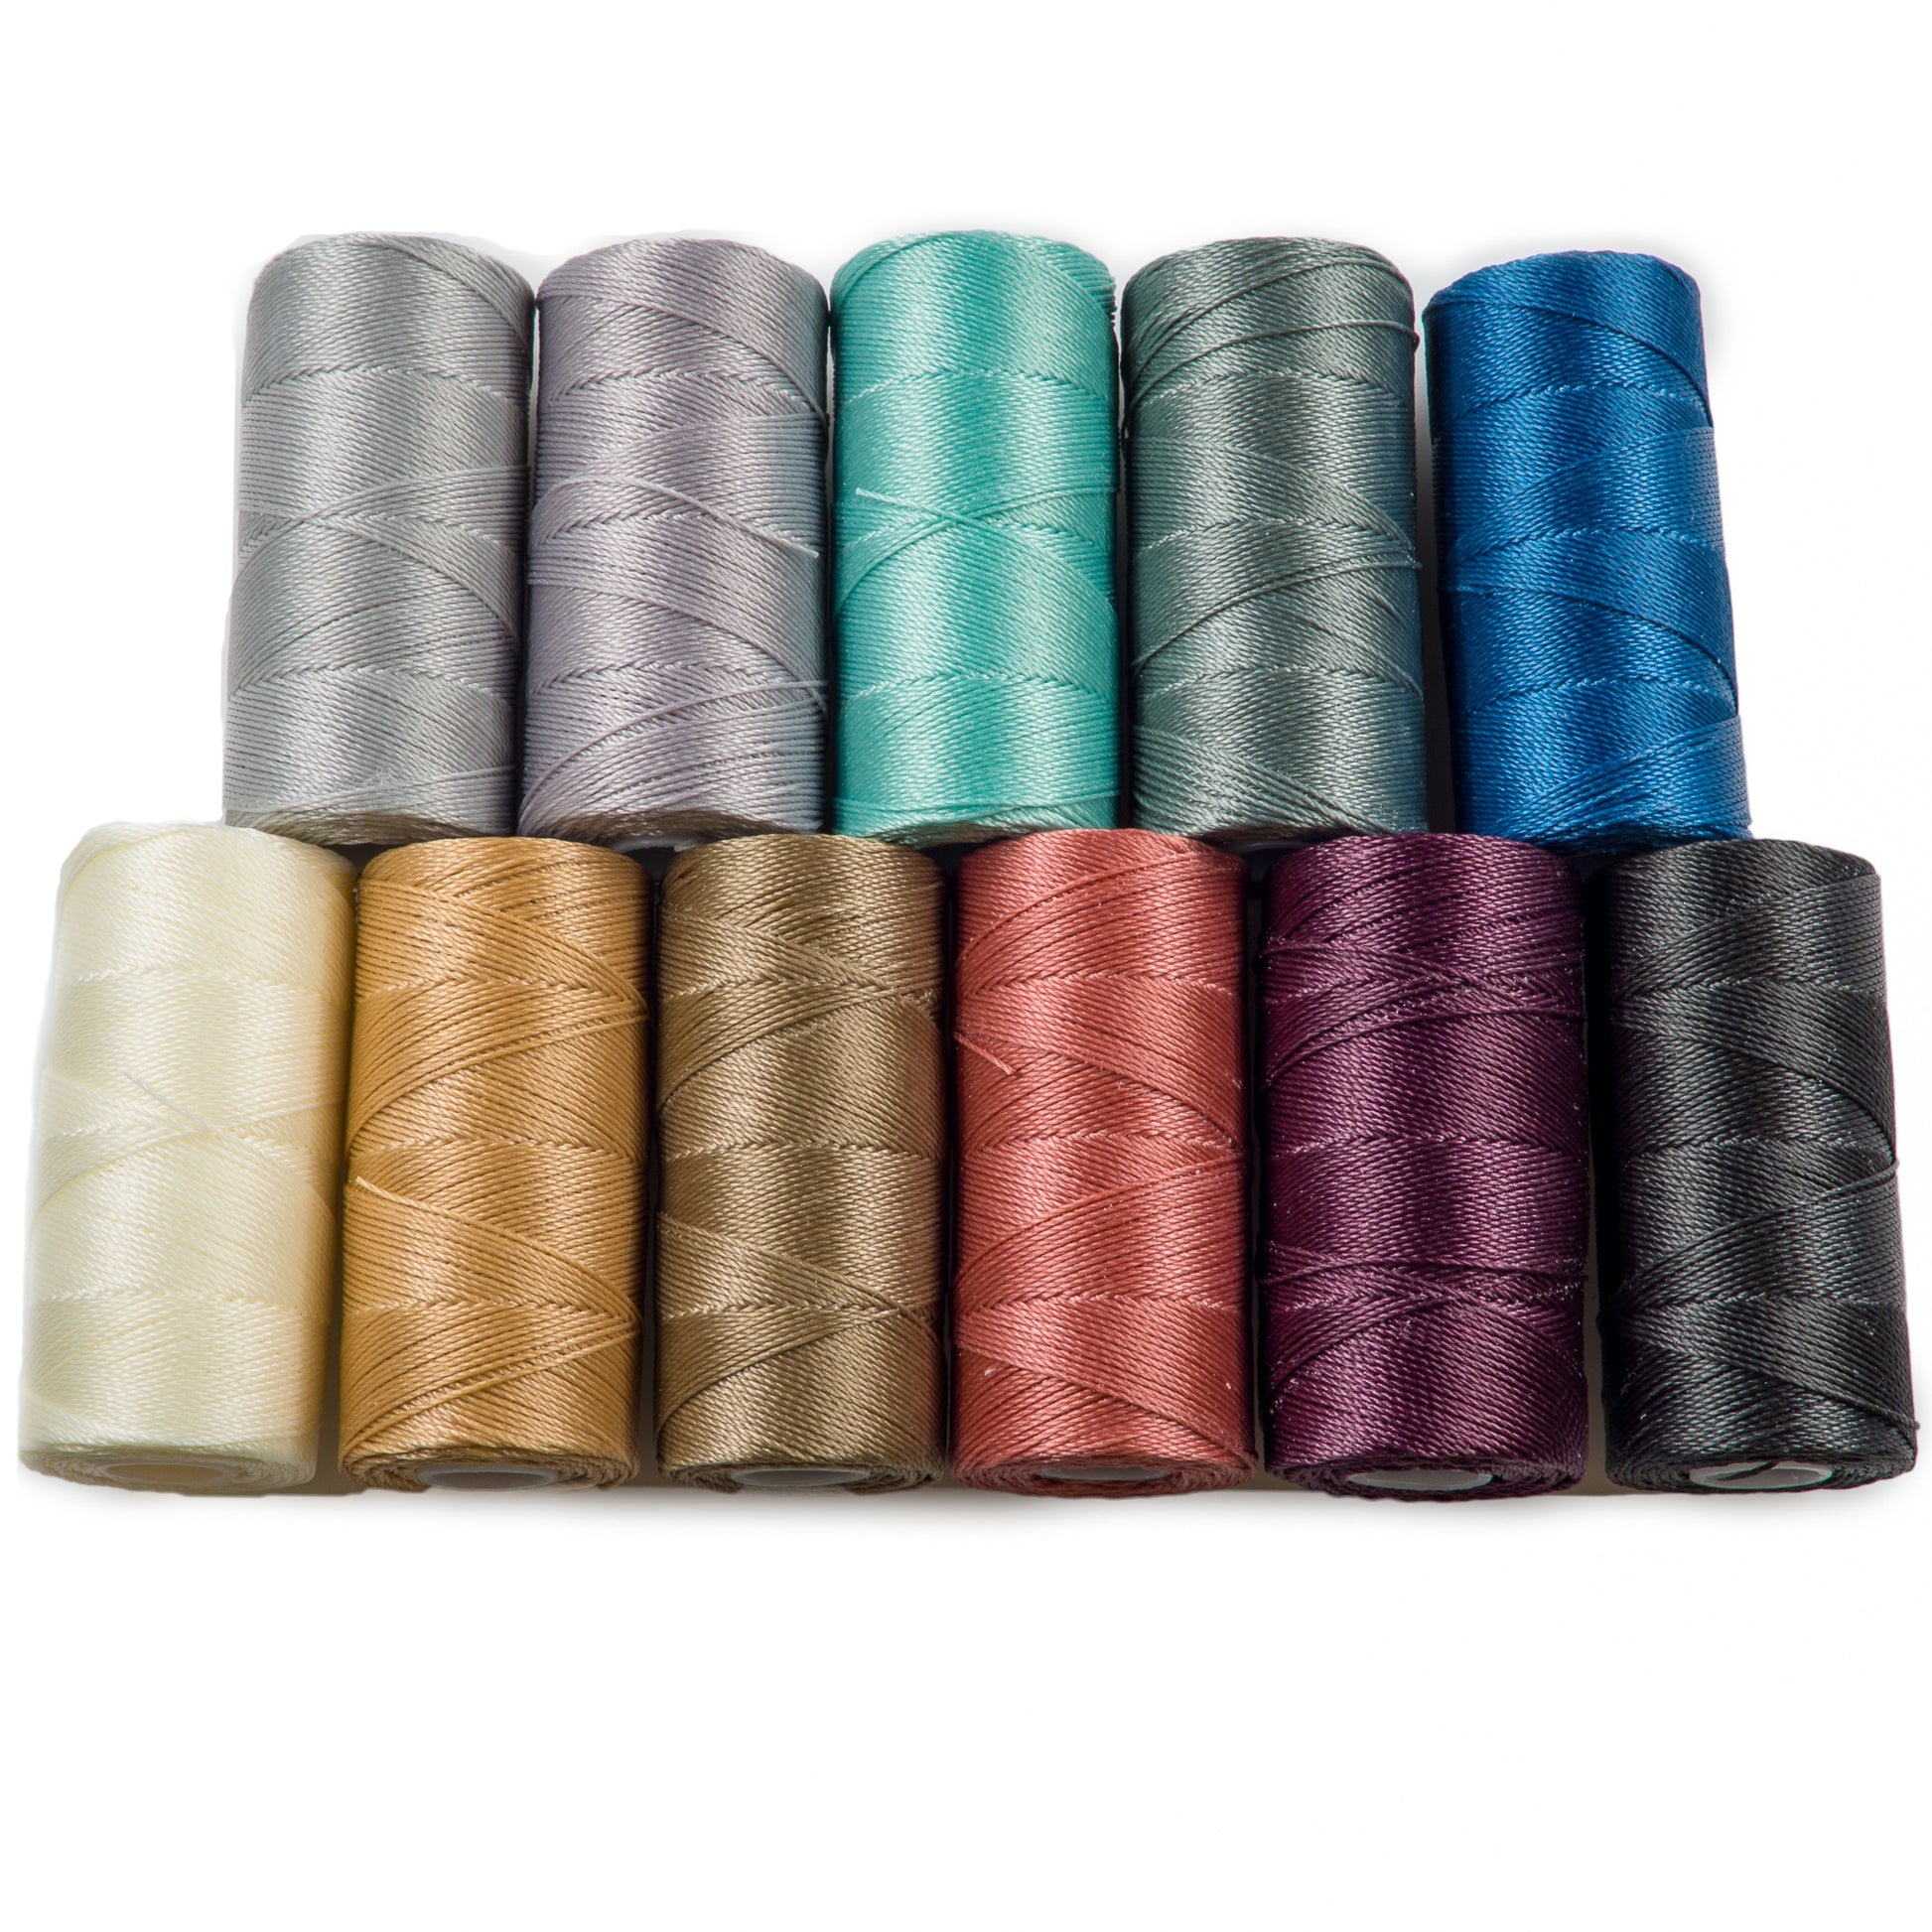 Micro Cord - 100 yd. Mini Spool (our BESTSELLING colors!!!)